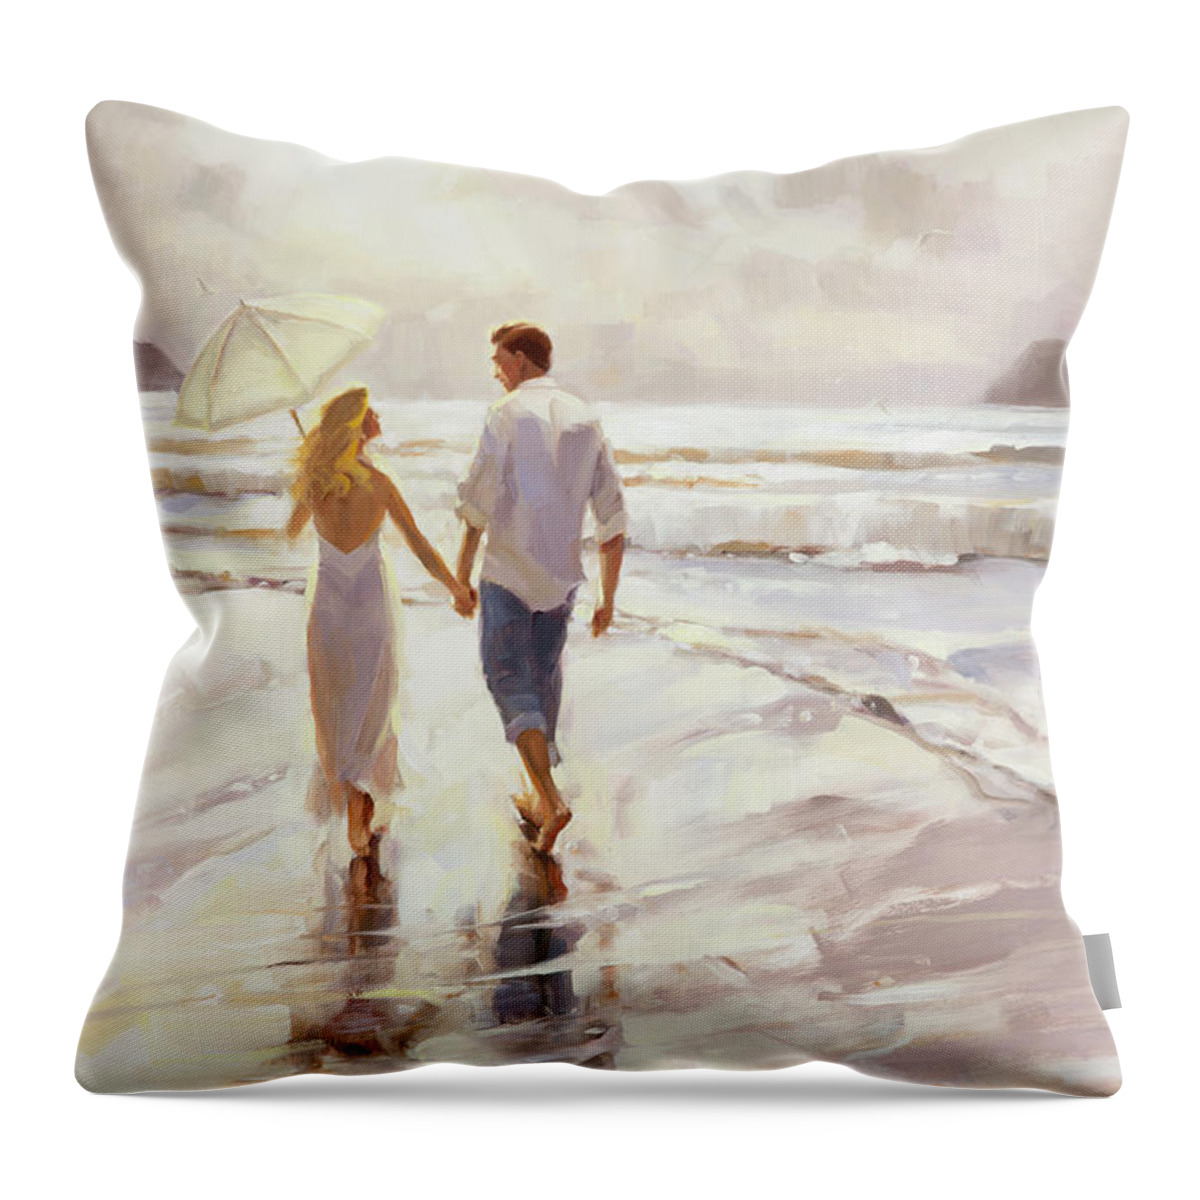 Romantic Throw Pillow featuring the painting Hand in Hand by Steve Henderson